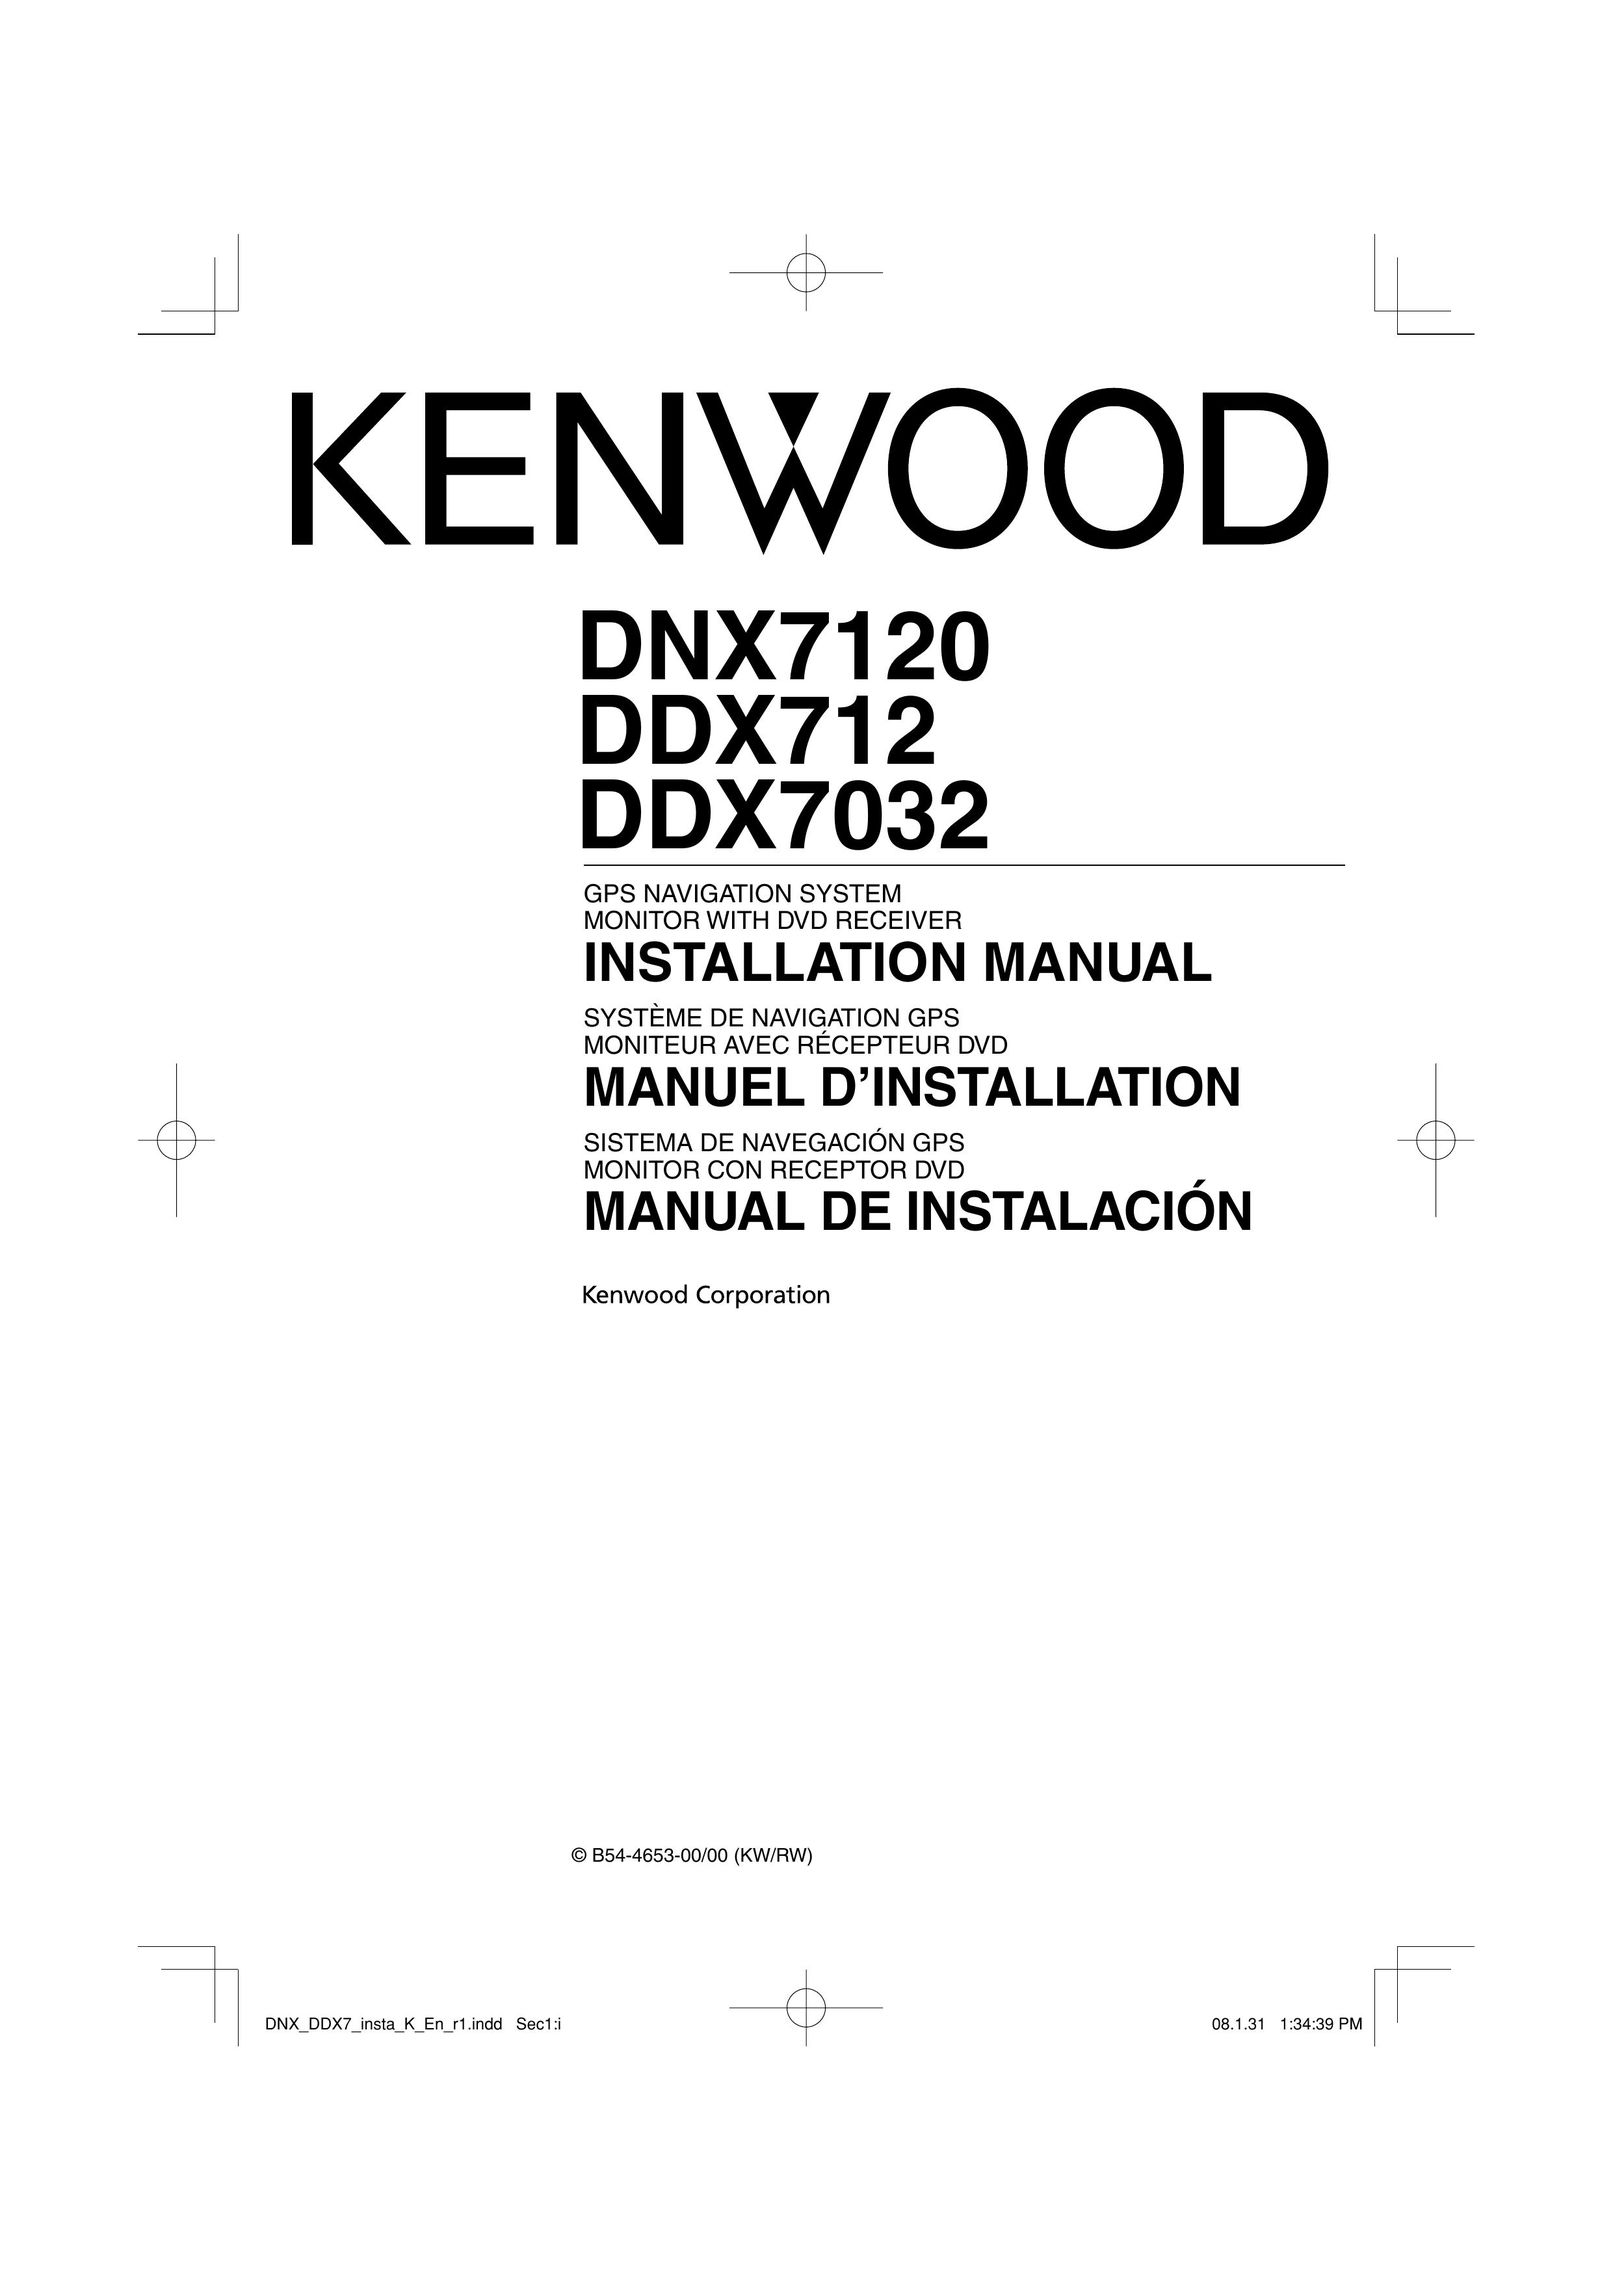 Kenwood DNX7120 Car Stereo System User Manual